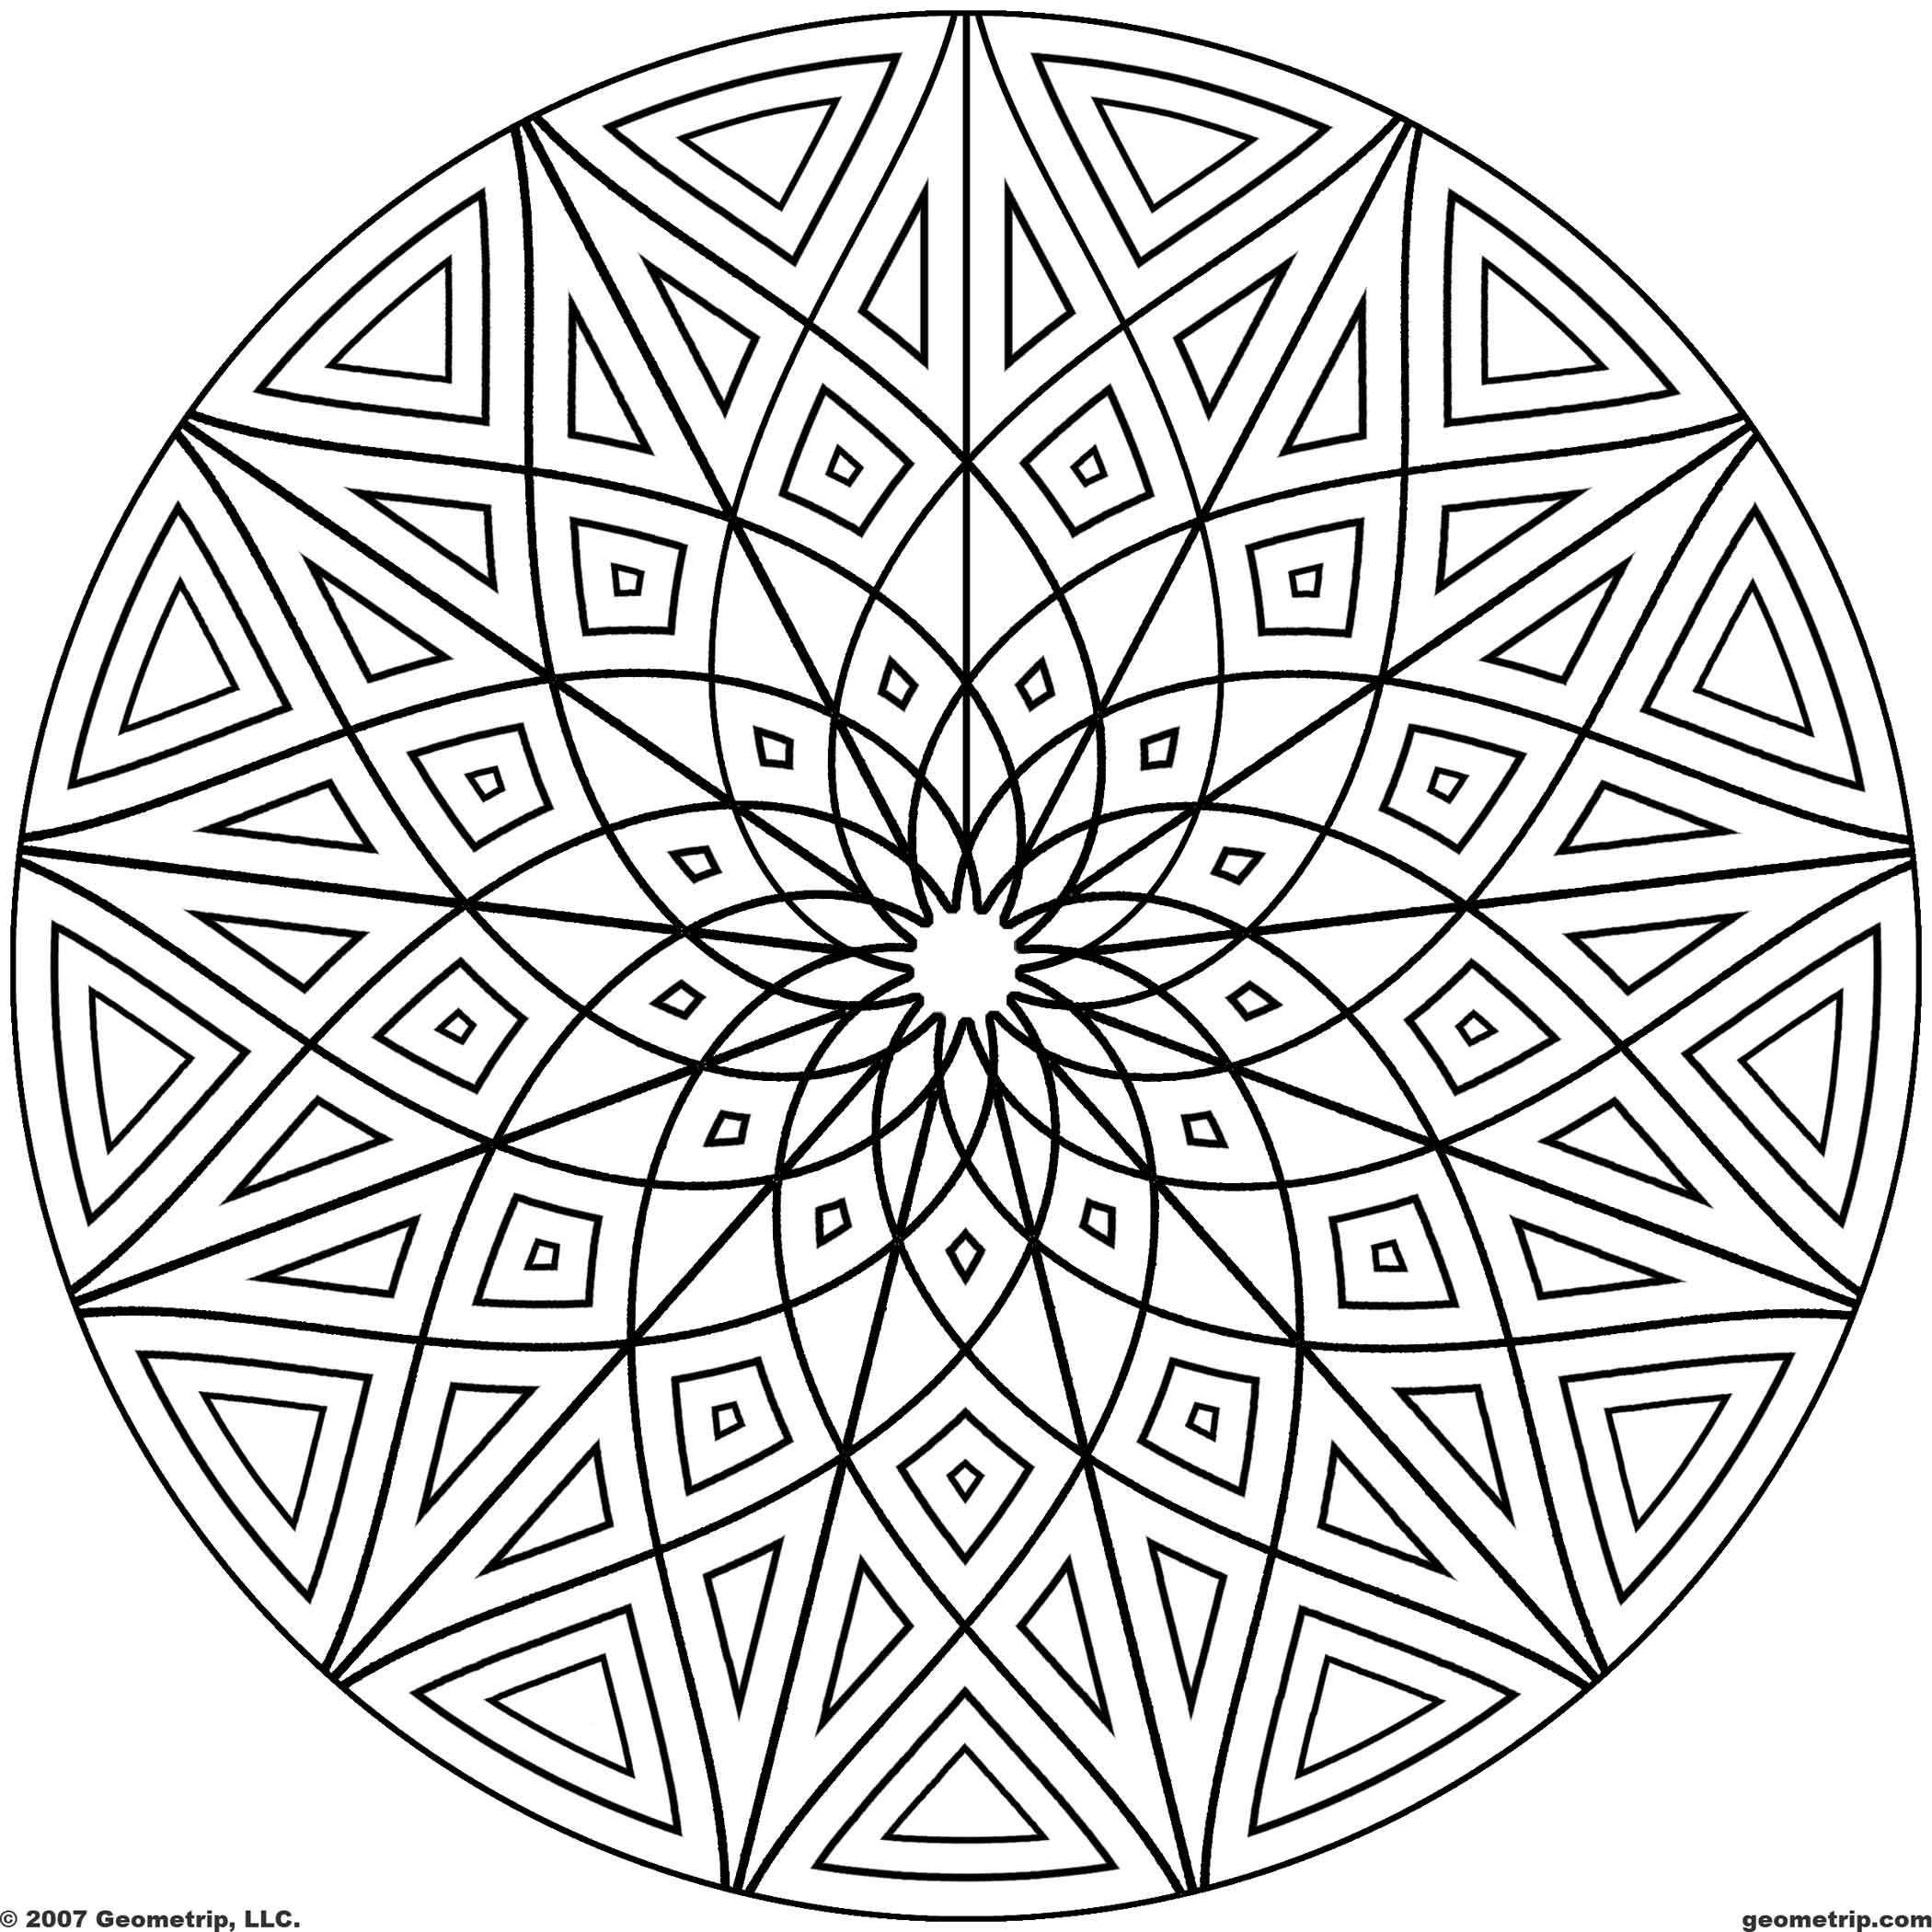 Cool Design Coloring Pages To Print - Coloring